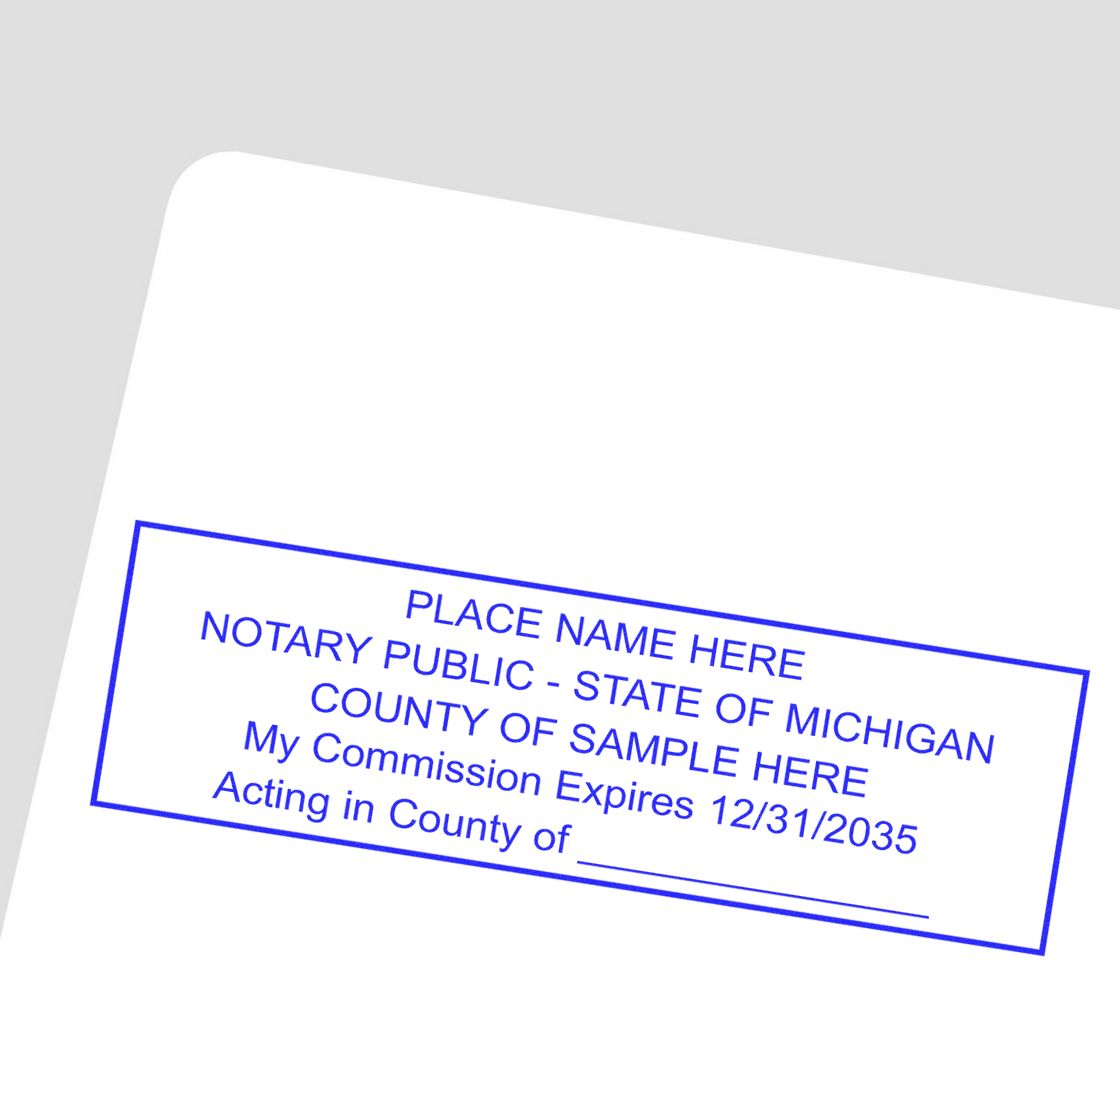 An alternative view of the Heavy-Duty Michigan Rectangular Notary Stamp stamped on a sheet of paper showing the image in use